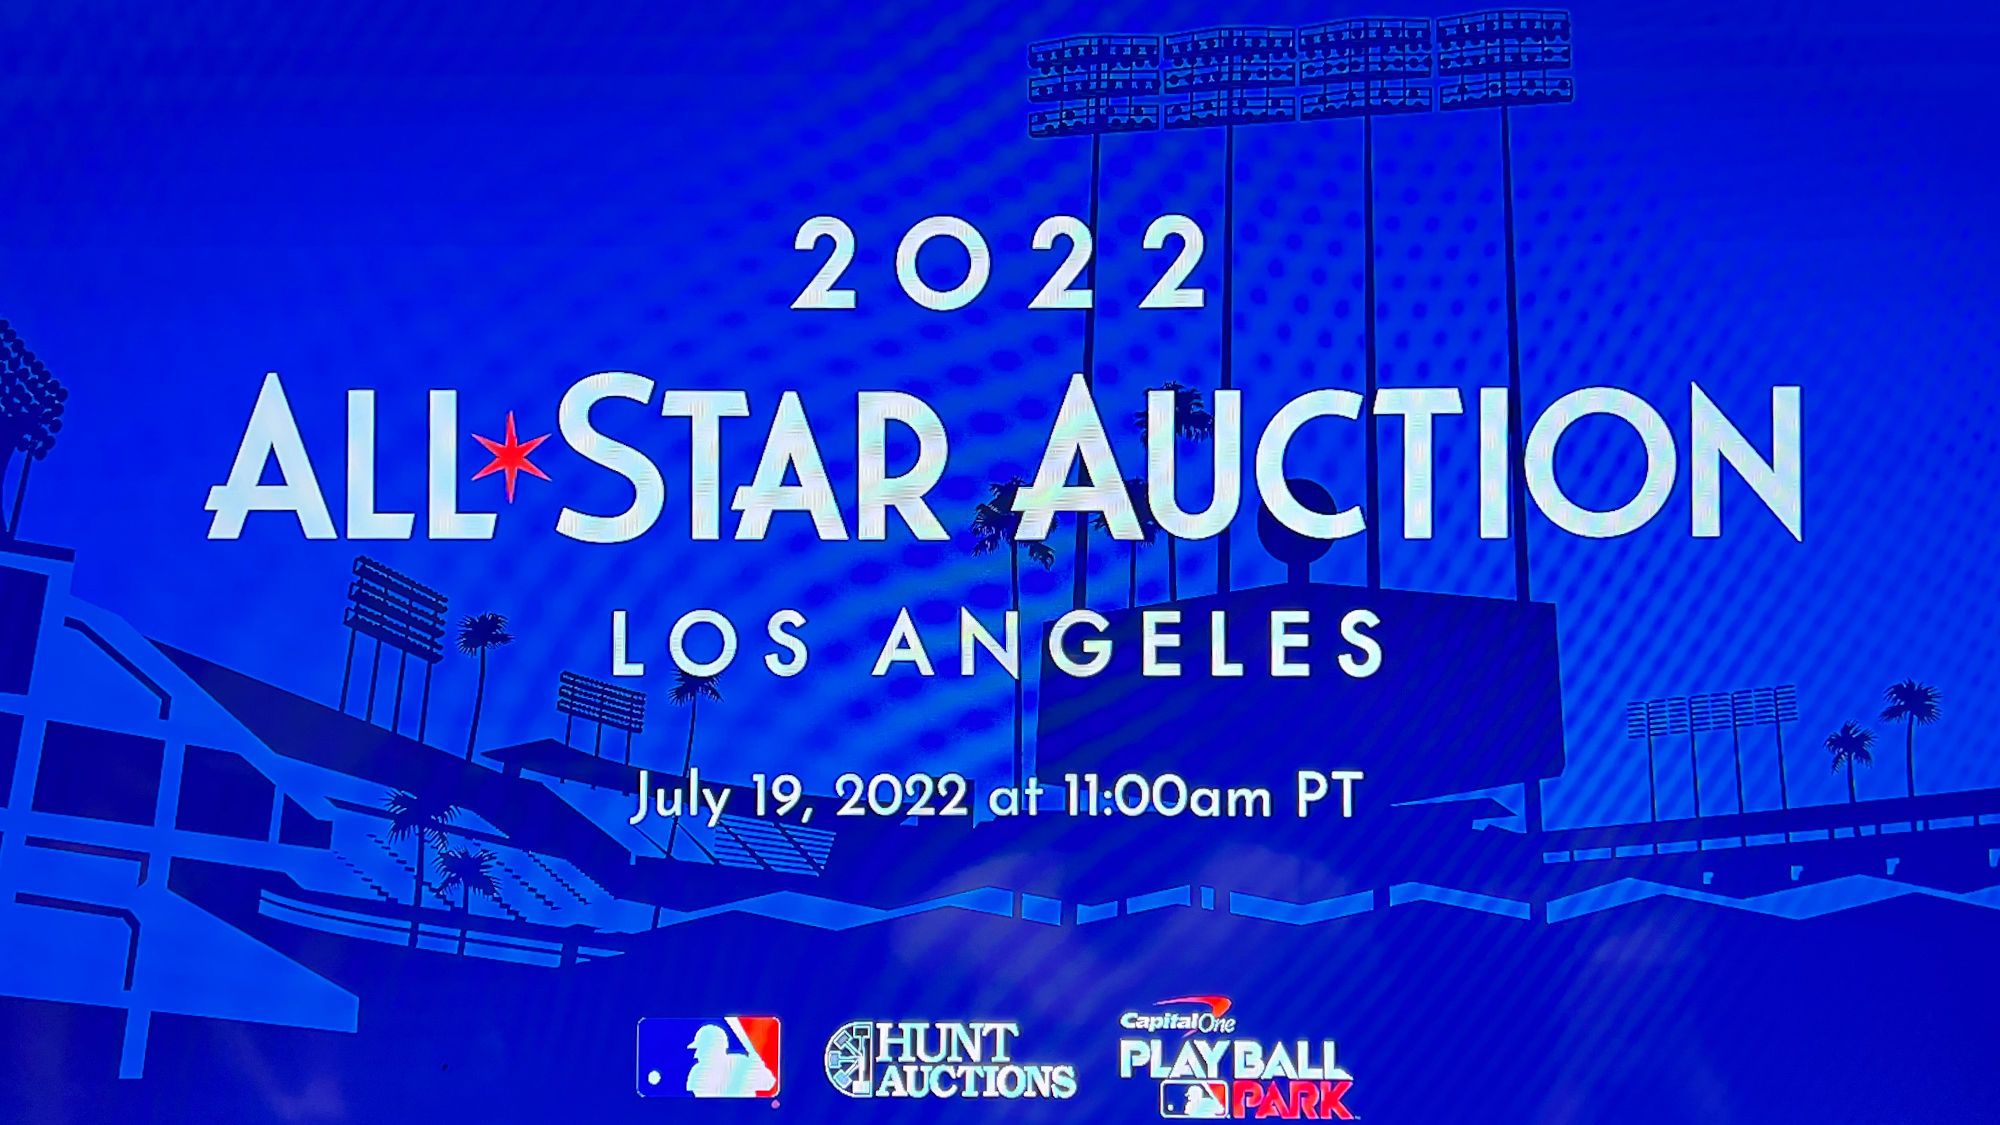 All Star Auction Presented by Hunt